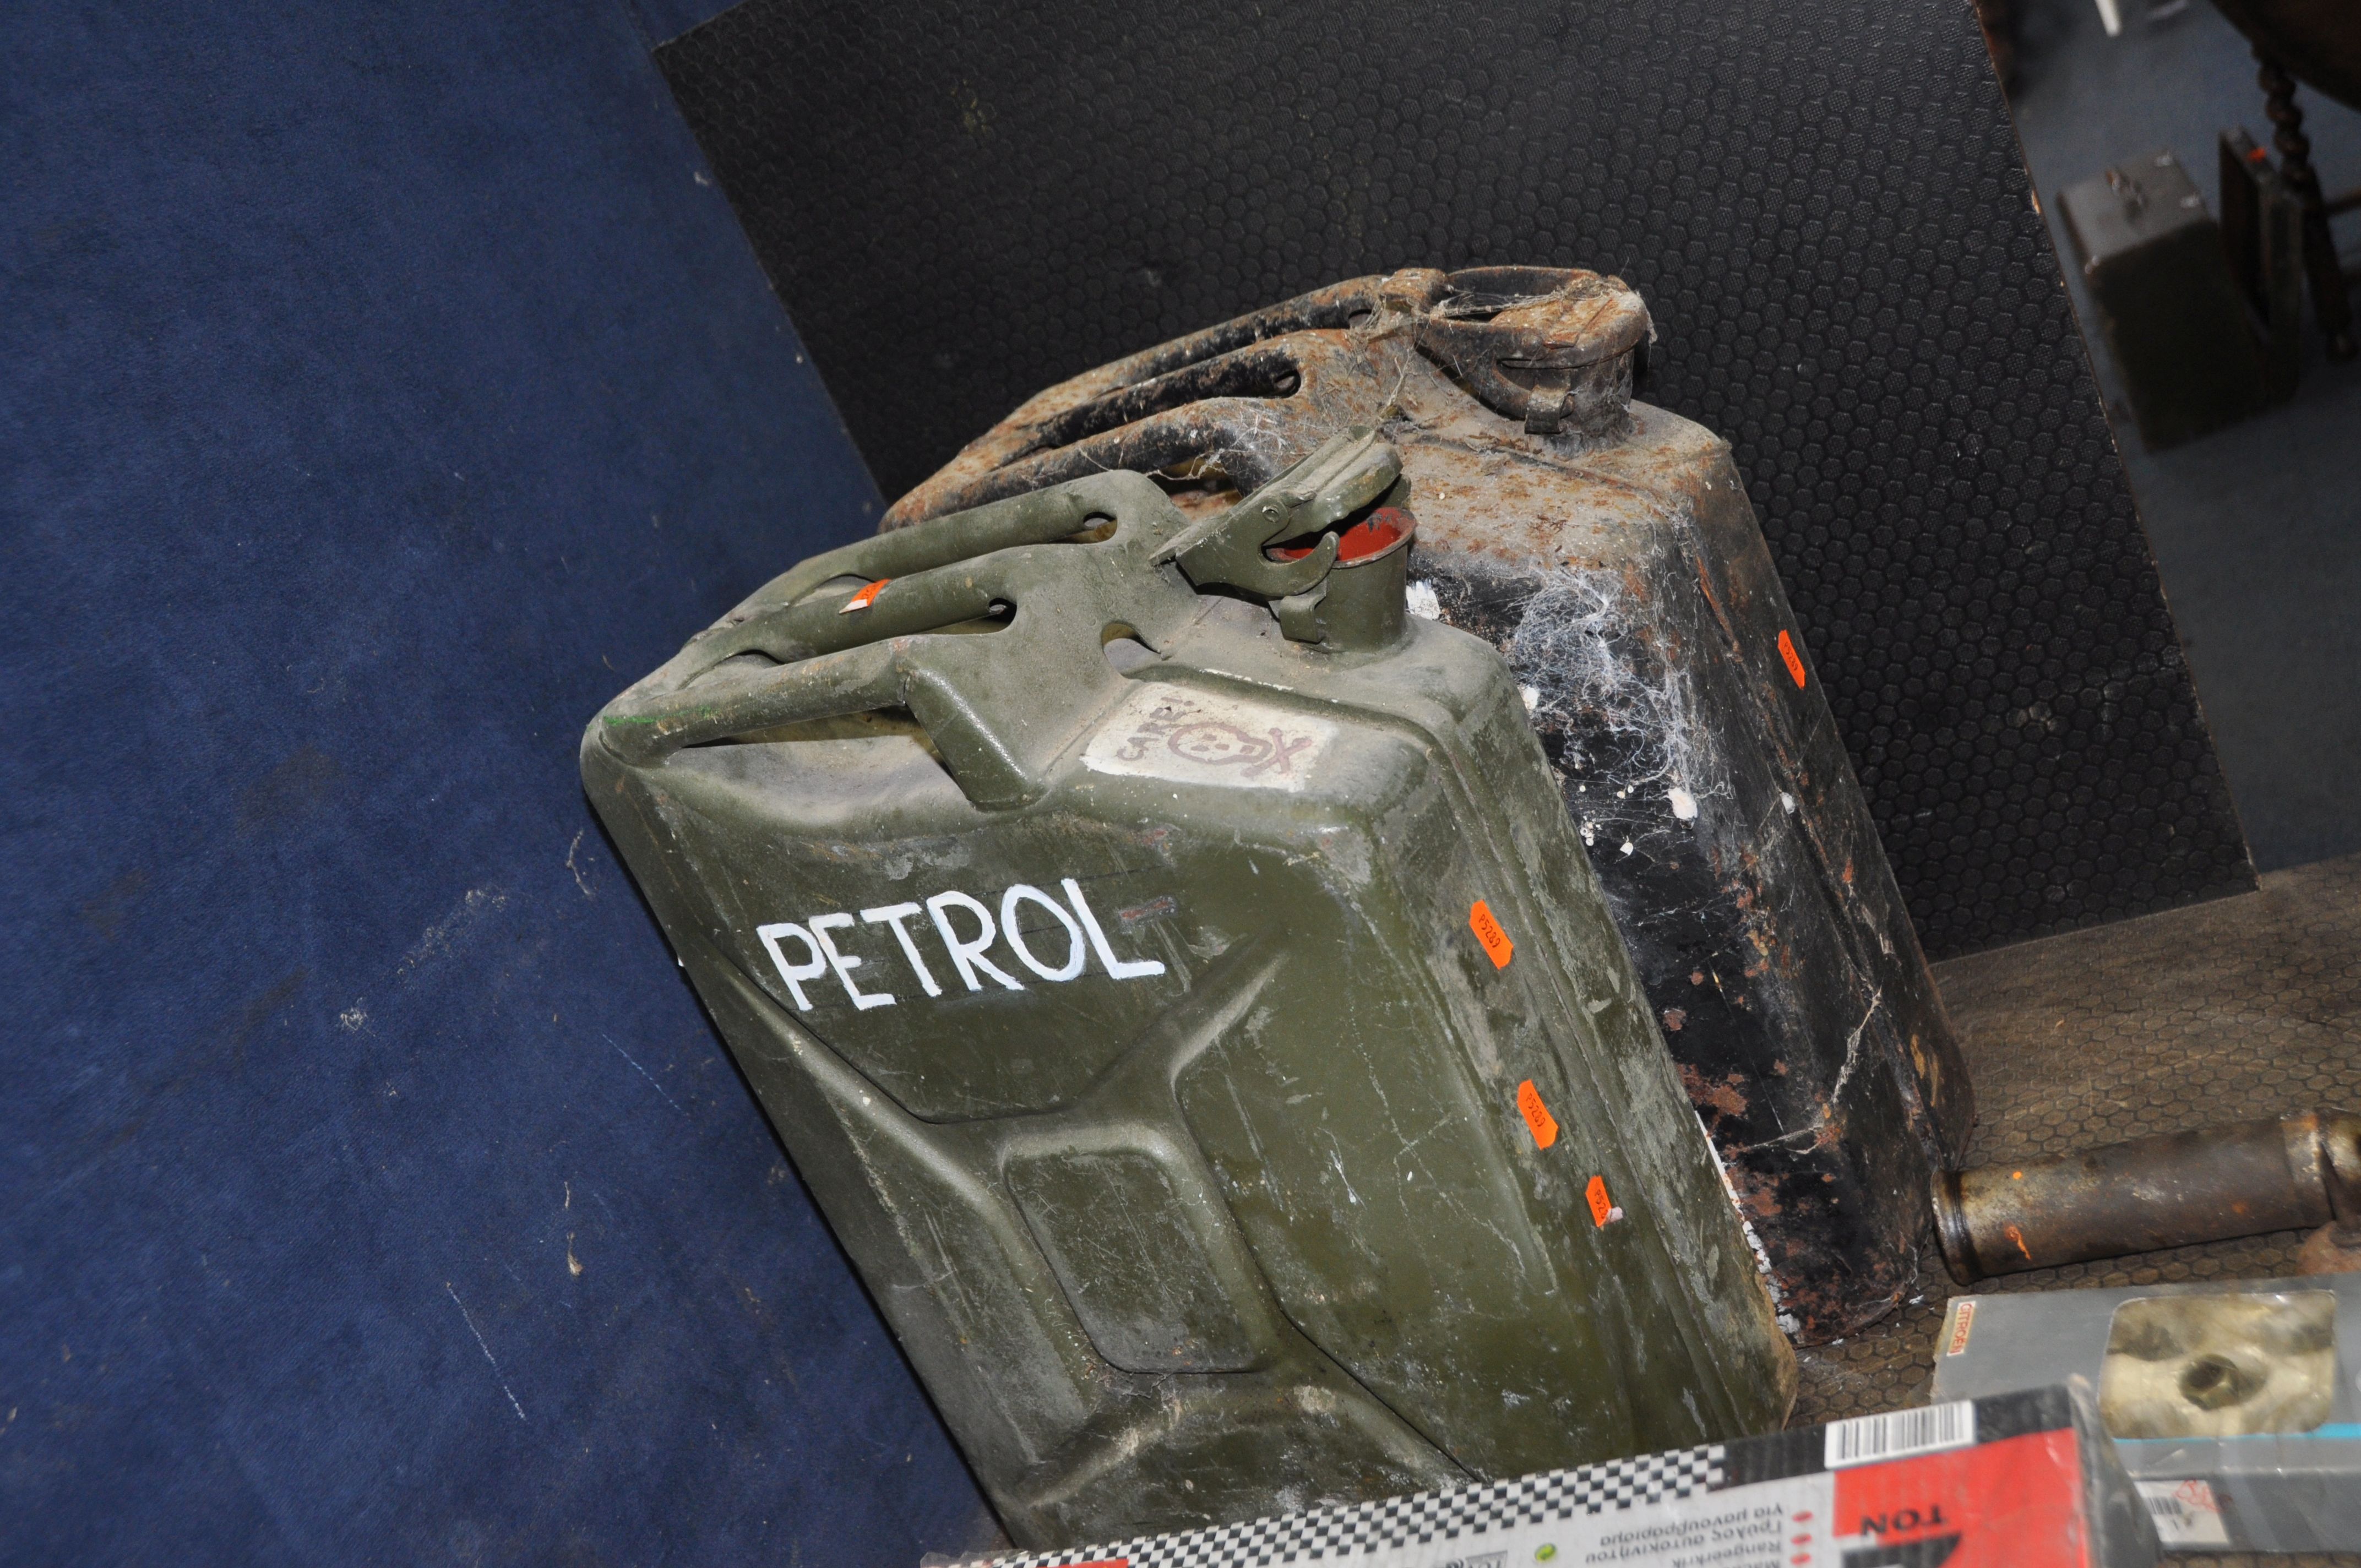 A COLLECTION OF AUTOMOTIVE TOOLS including a brand new still packaged 2 tonne trolley jack, two ' - Image 3 of 5